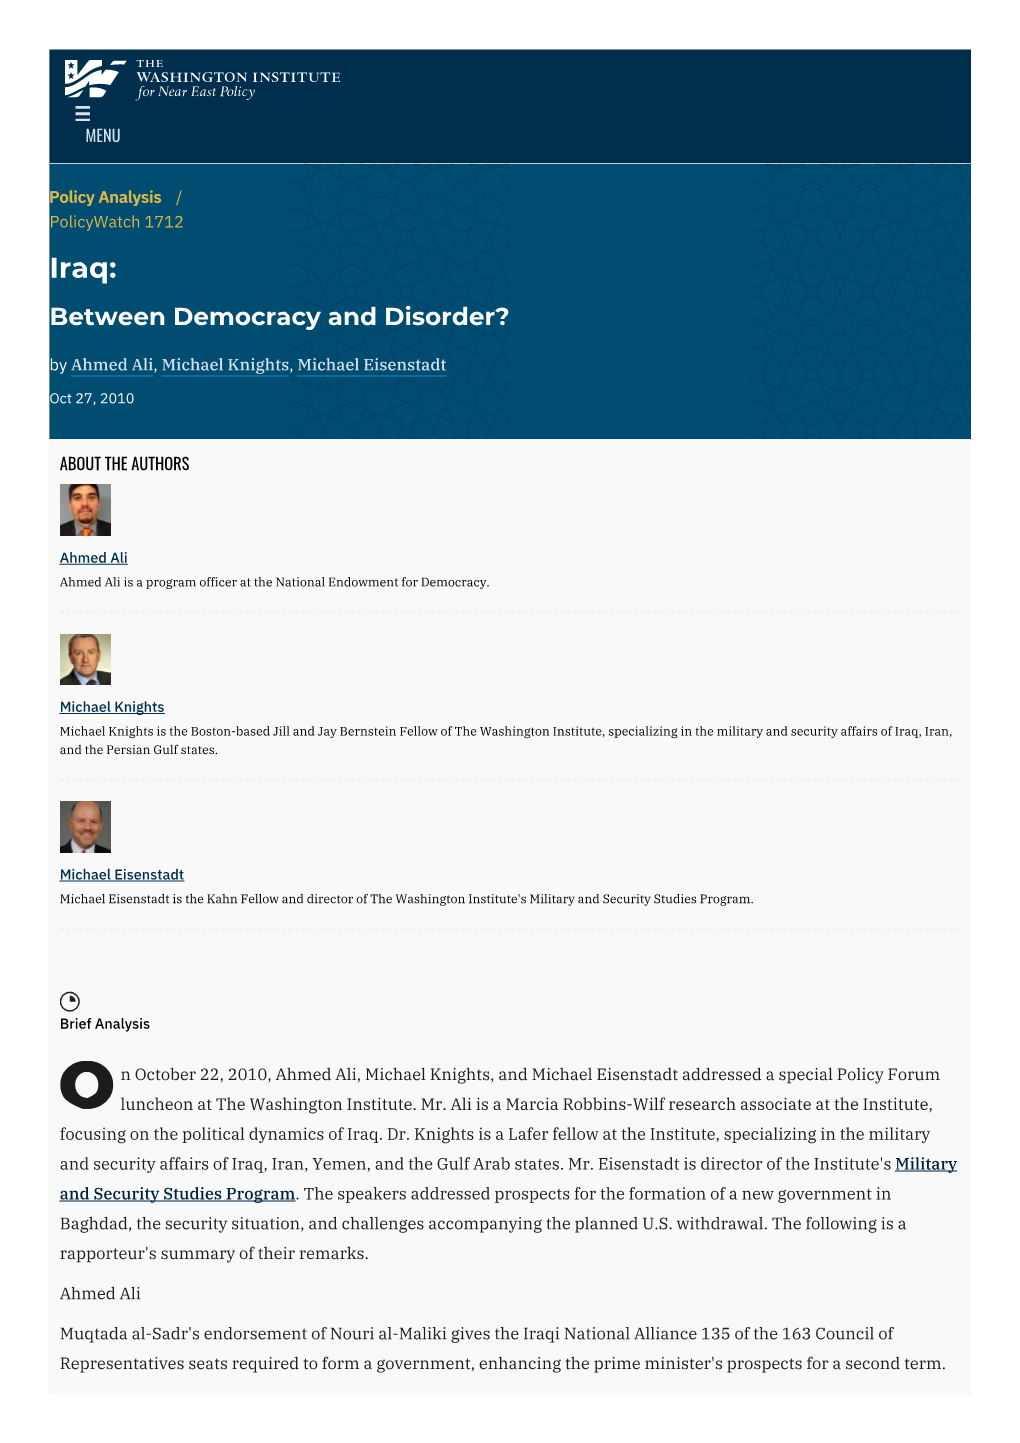 Iraq: Between Democracy and Disorder? | the Washington Institute